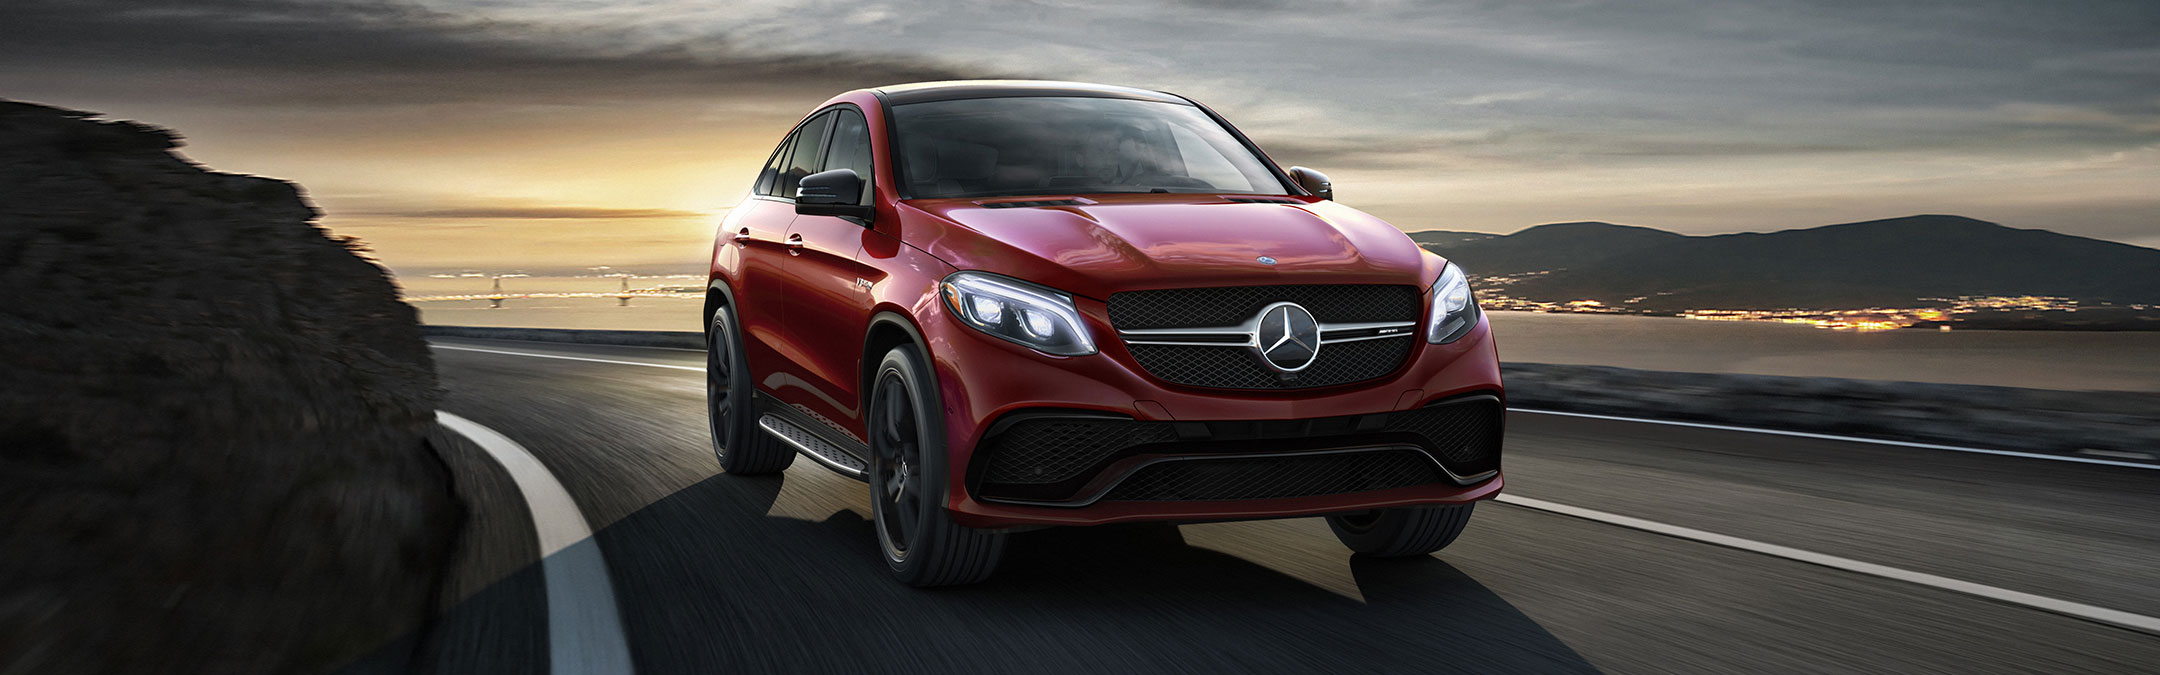 March 2020 AMG Lease Offers